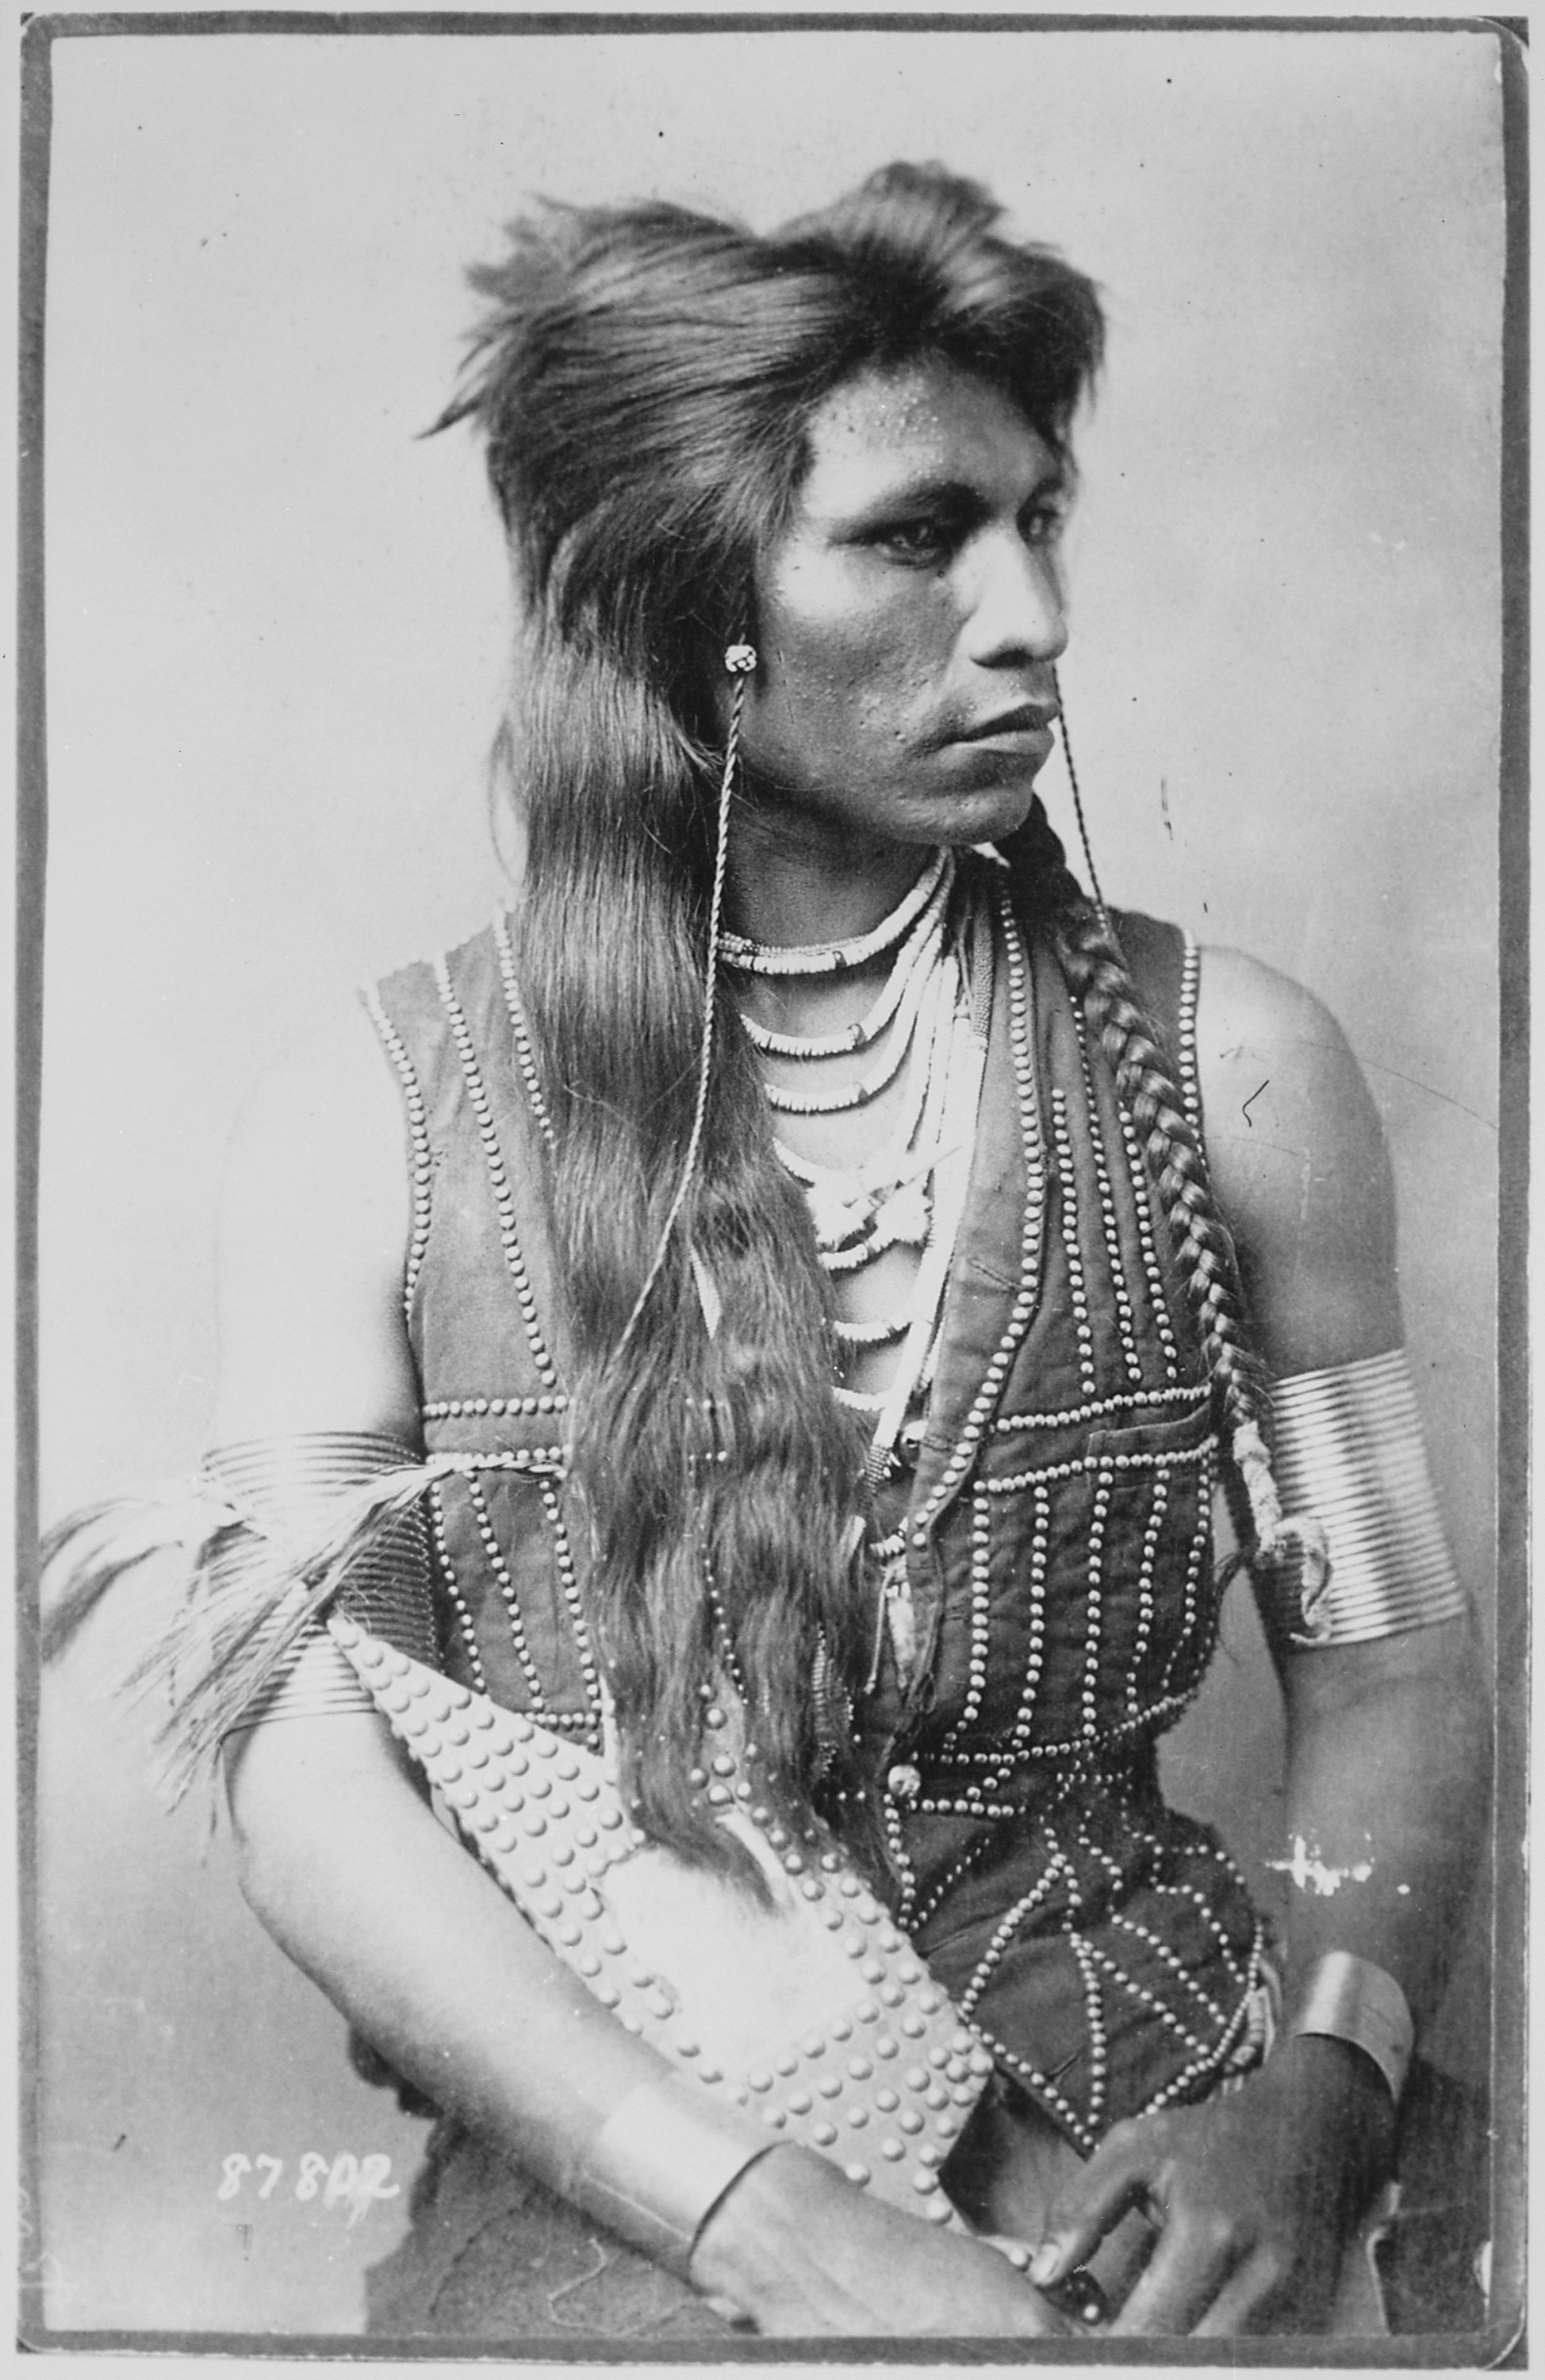 rabbit-tail_shoshone_member_of_captain_ray_s_scout_company_half-length_seated_with_bracelets_and_ornamented_vest_nara_530920.jpg